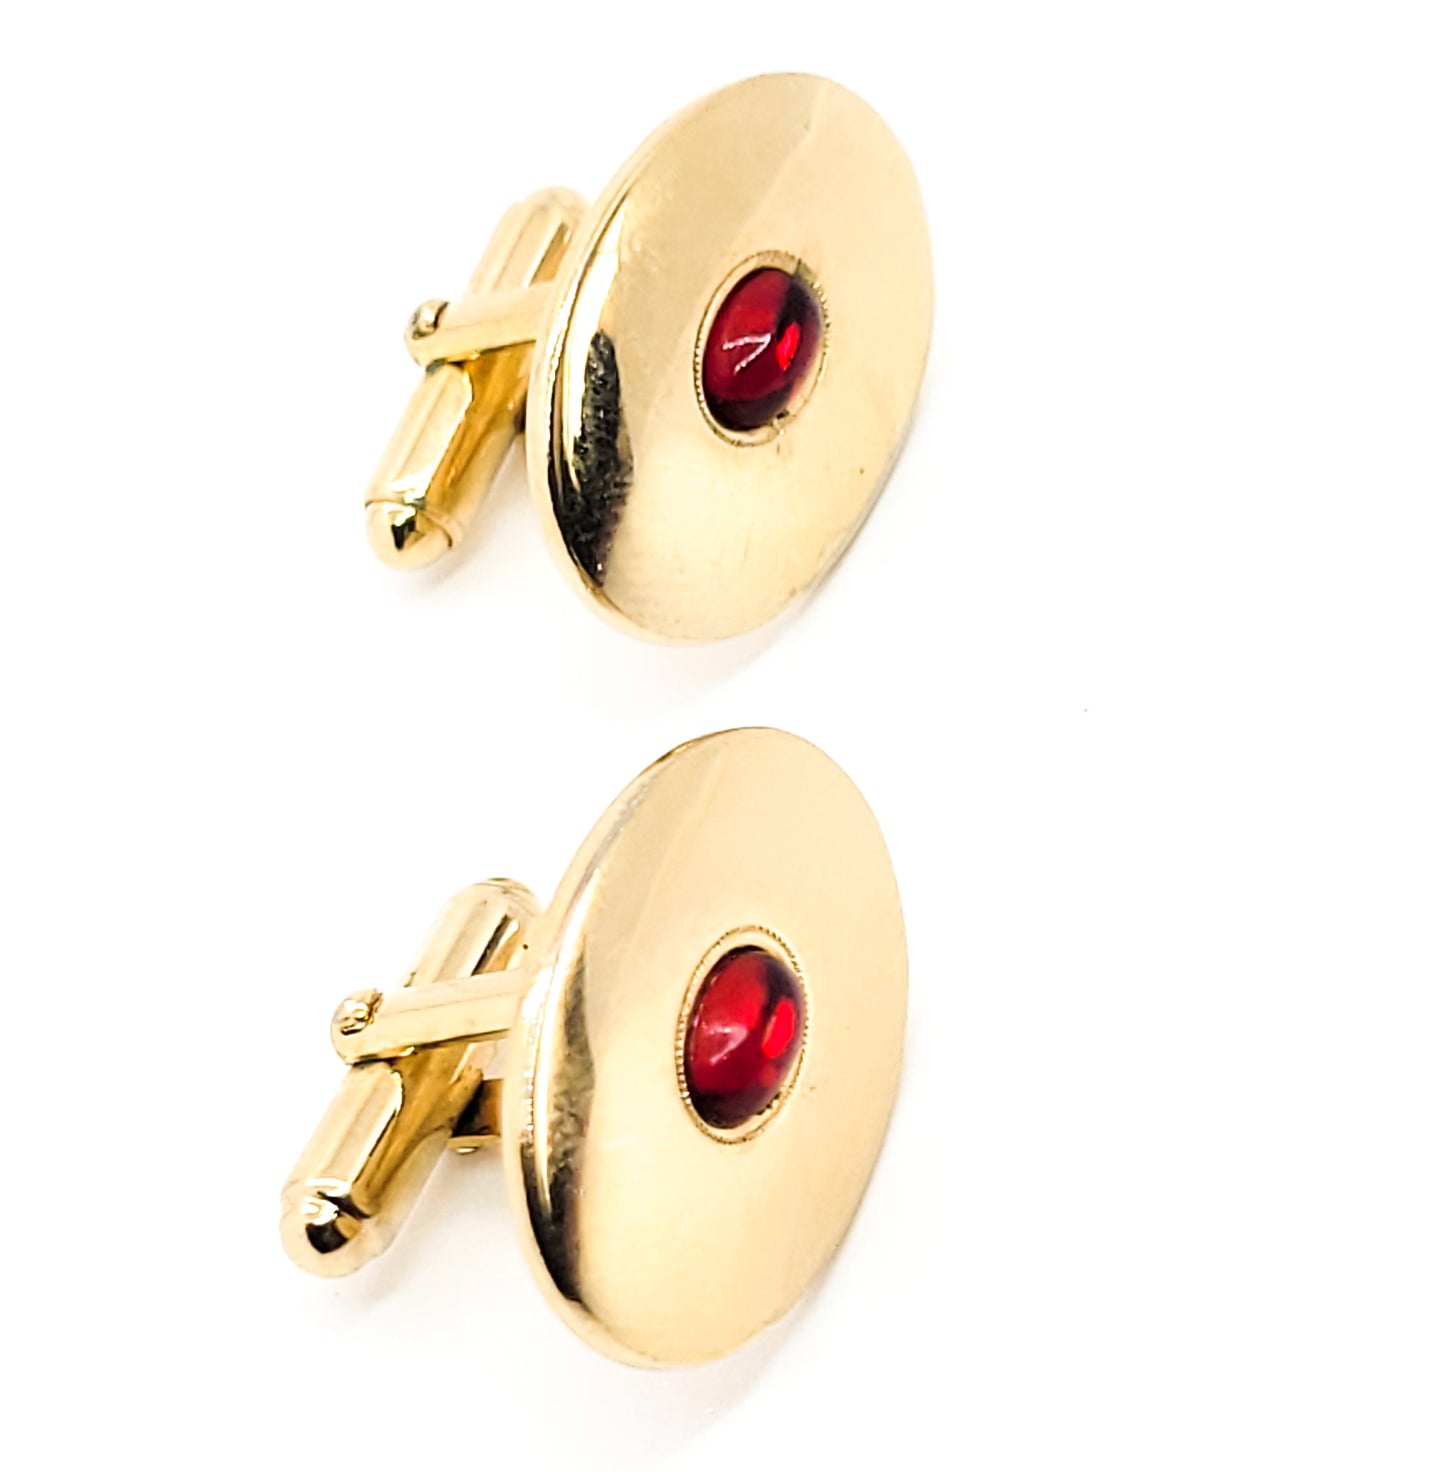 Anson Red and gold jelly belly glass cab signed vintage cuff links